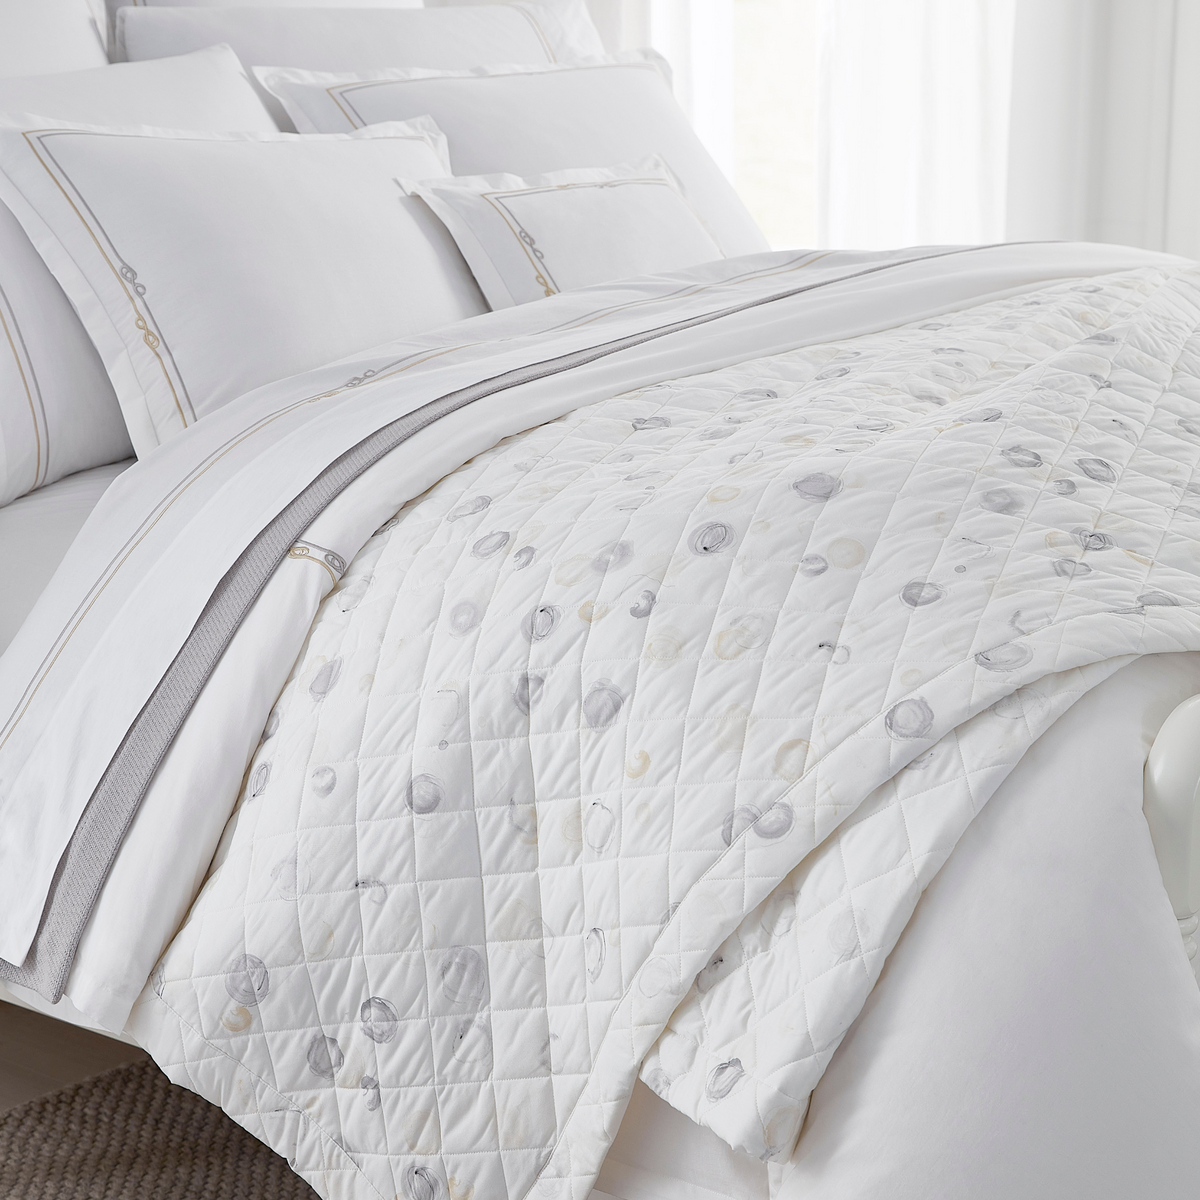 Sferra Squillo Bedding Detail Lifestyle with Punti in White Platinum Color